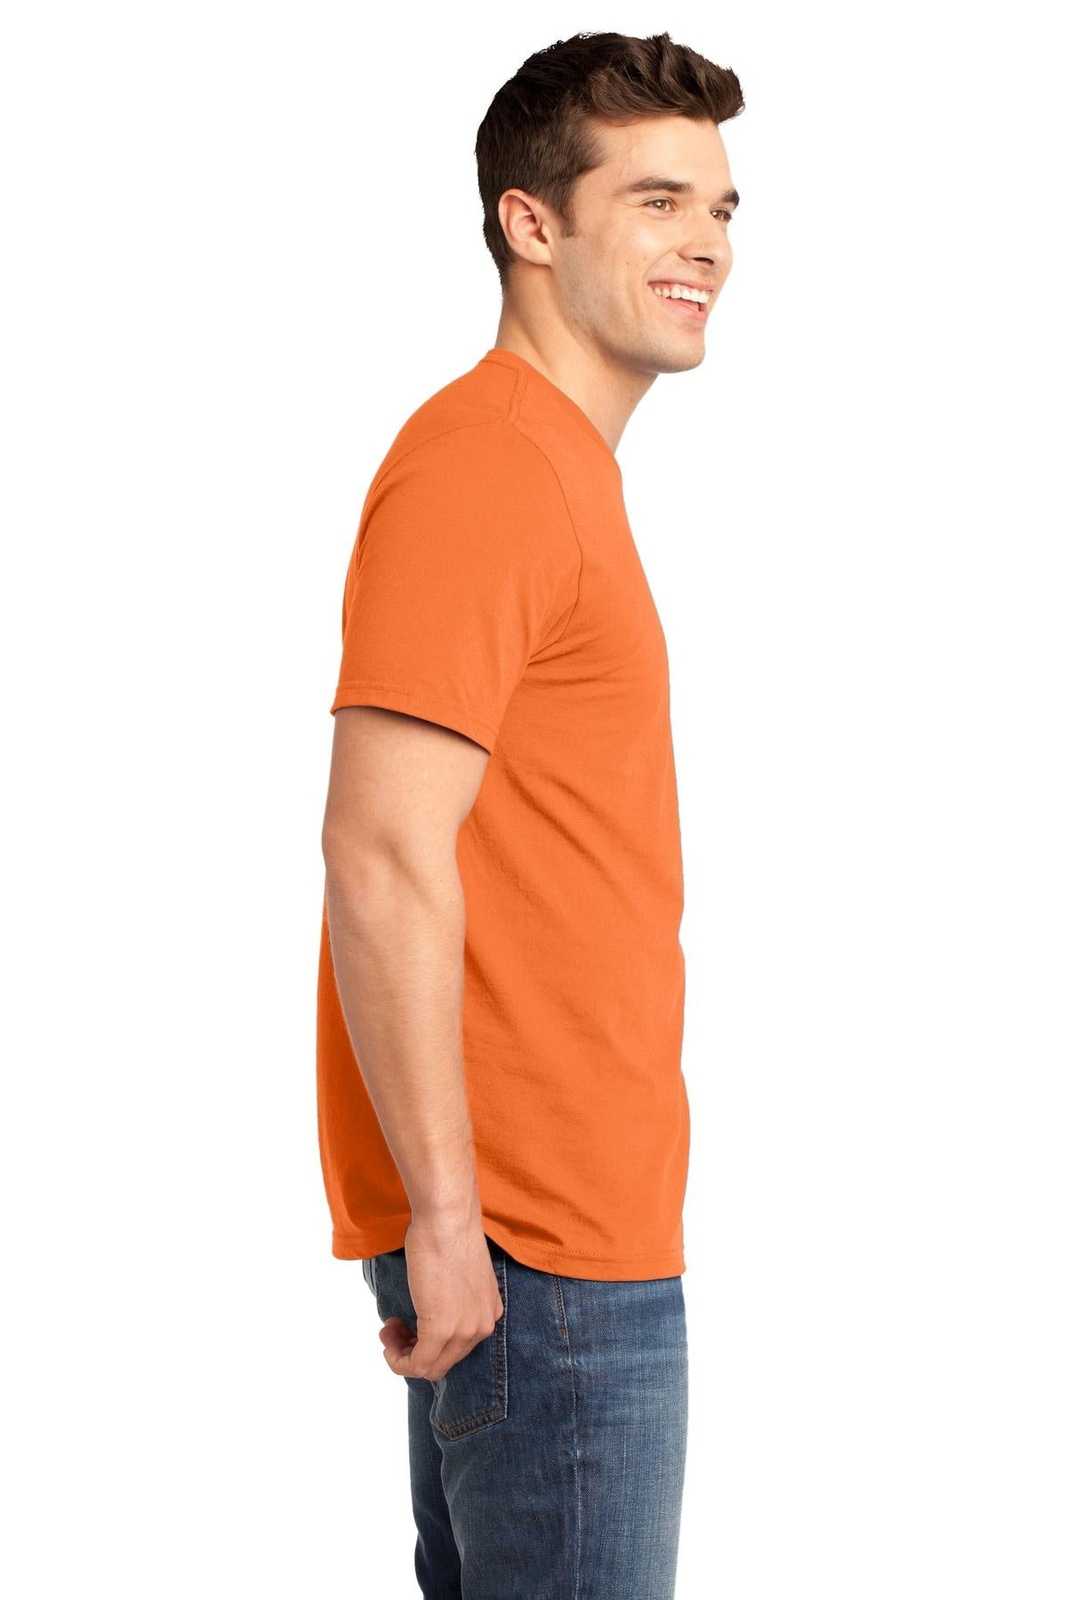 District DT6000 Very Important Tee - Orange - HIT a Double - 3